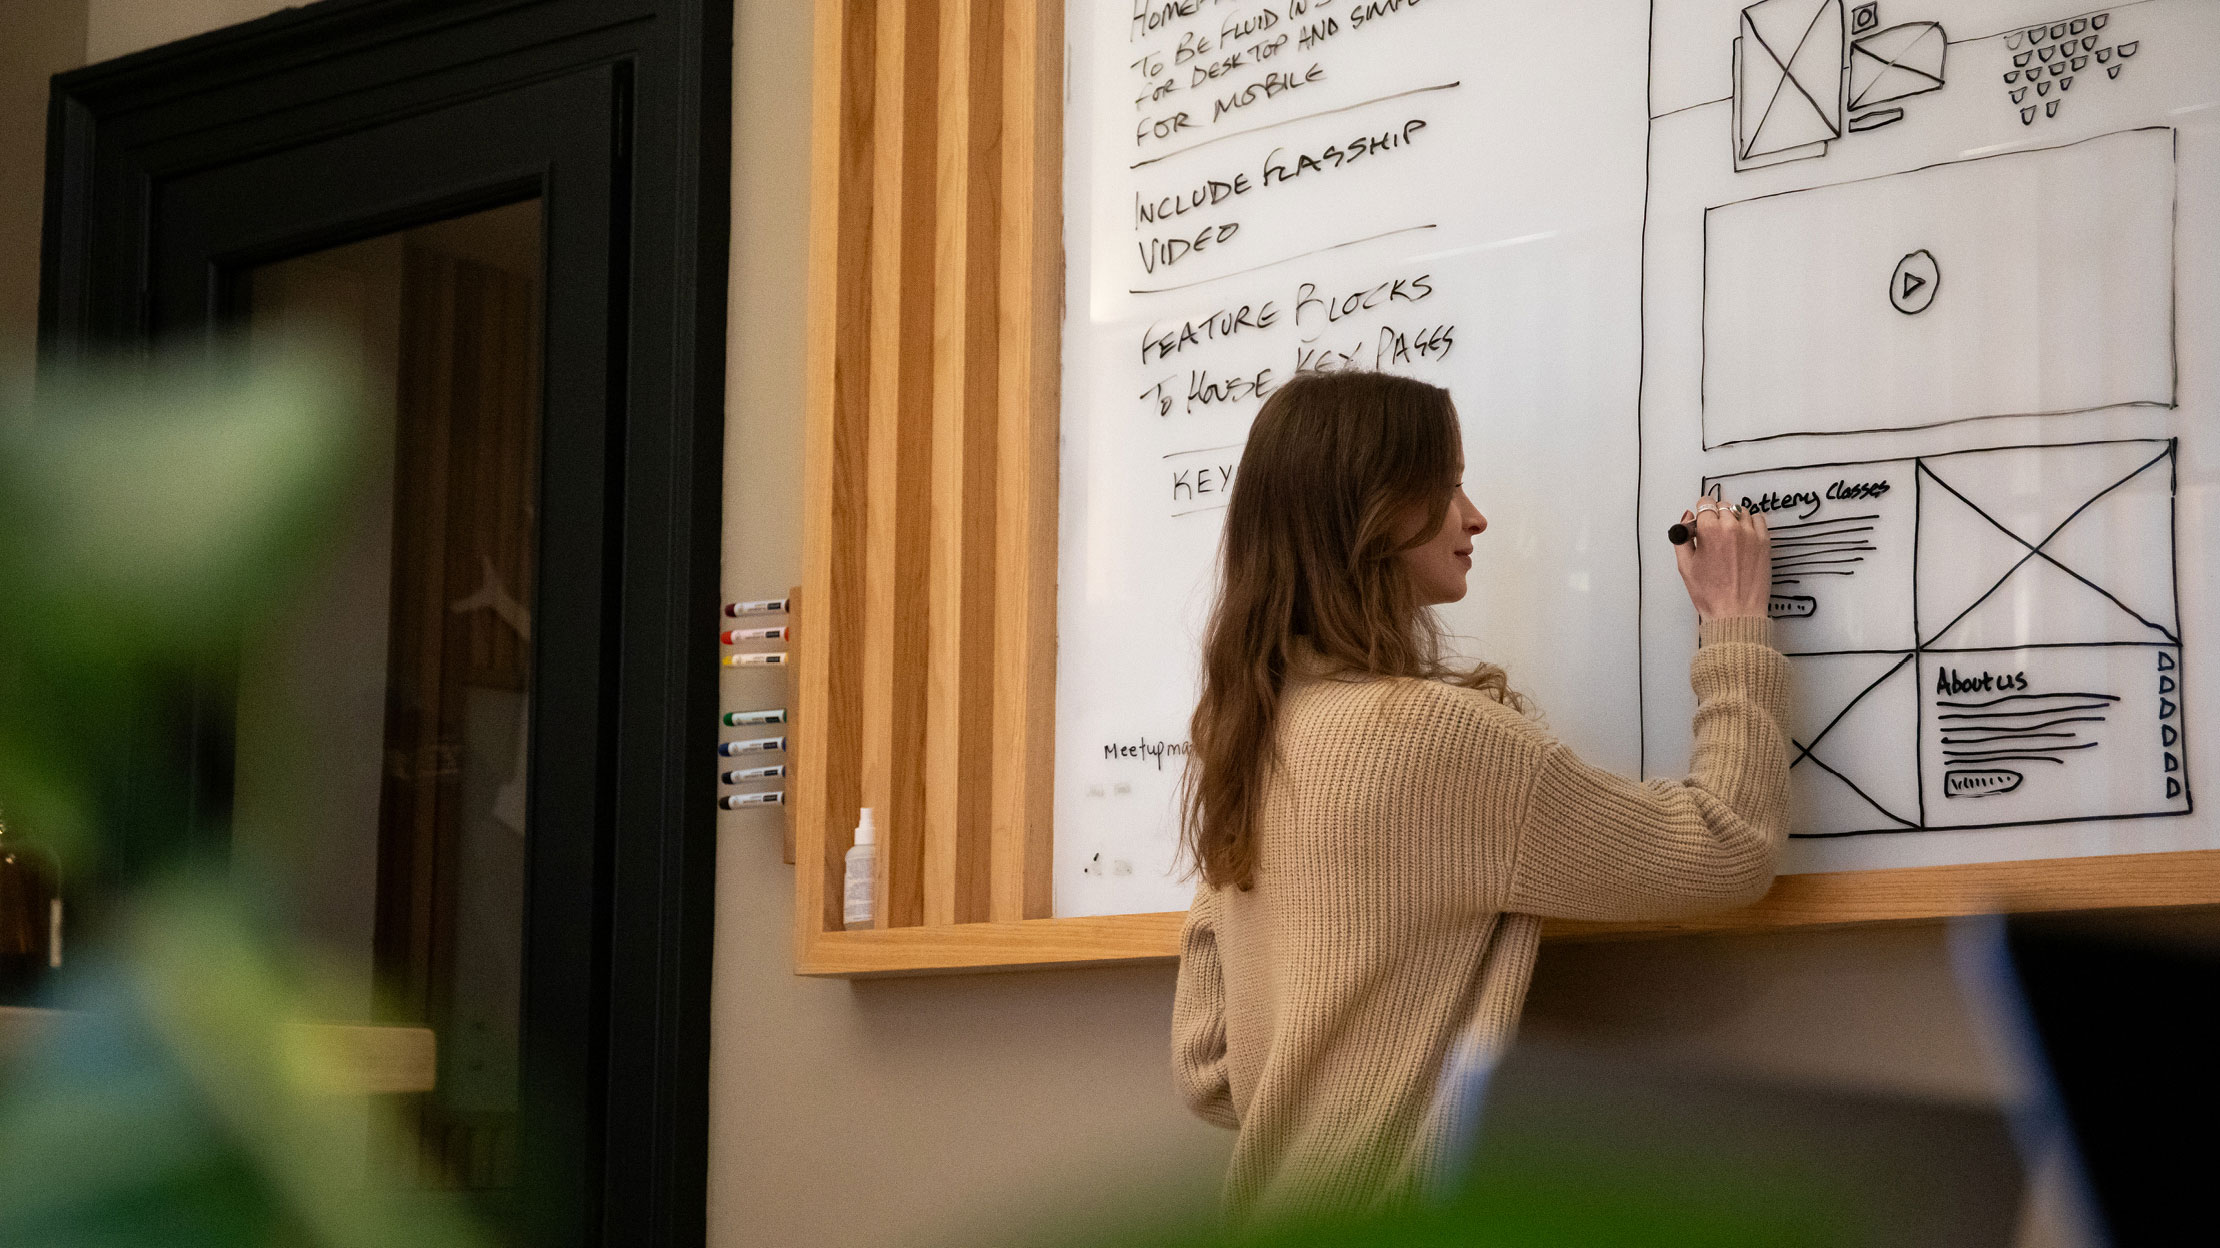 Firefly team member working on UX design sketch on a whiteboard.